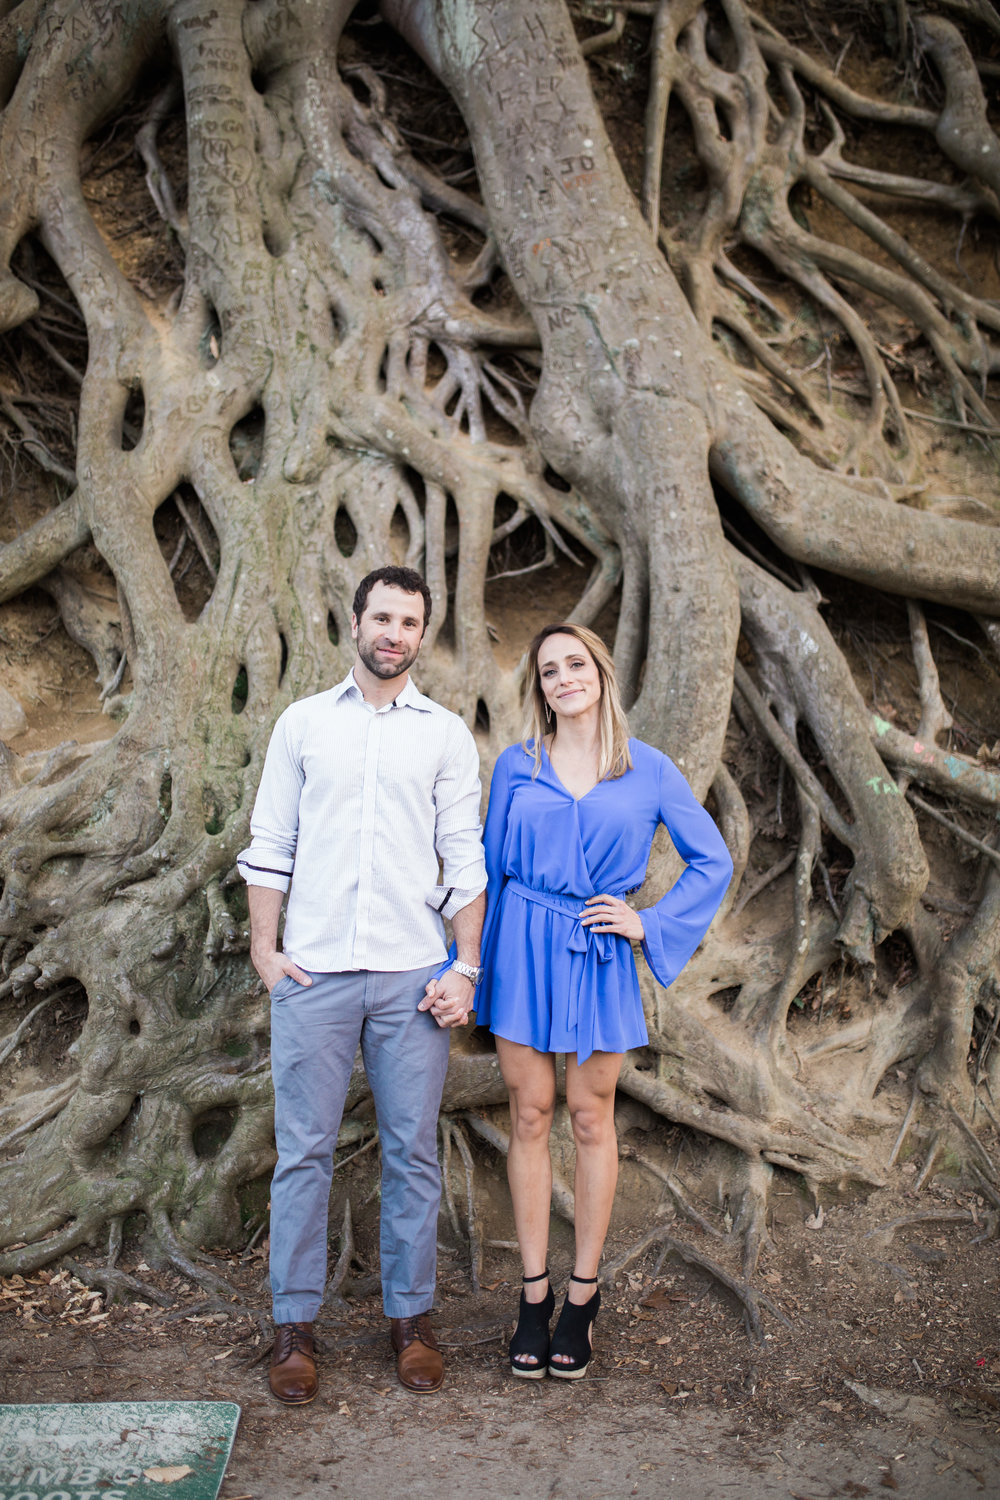 Matt and Angela in front of the Tree Roots